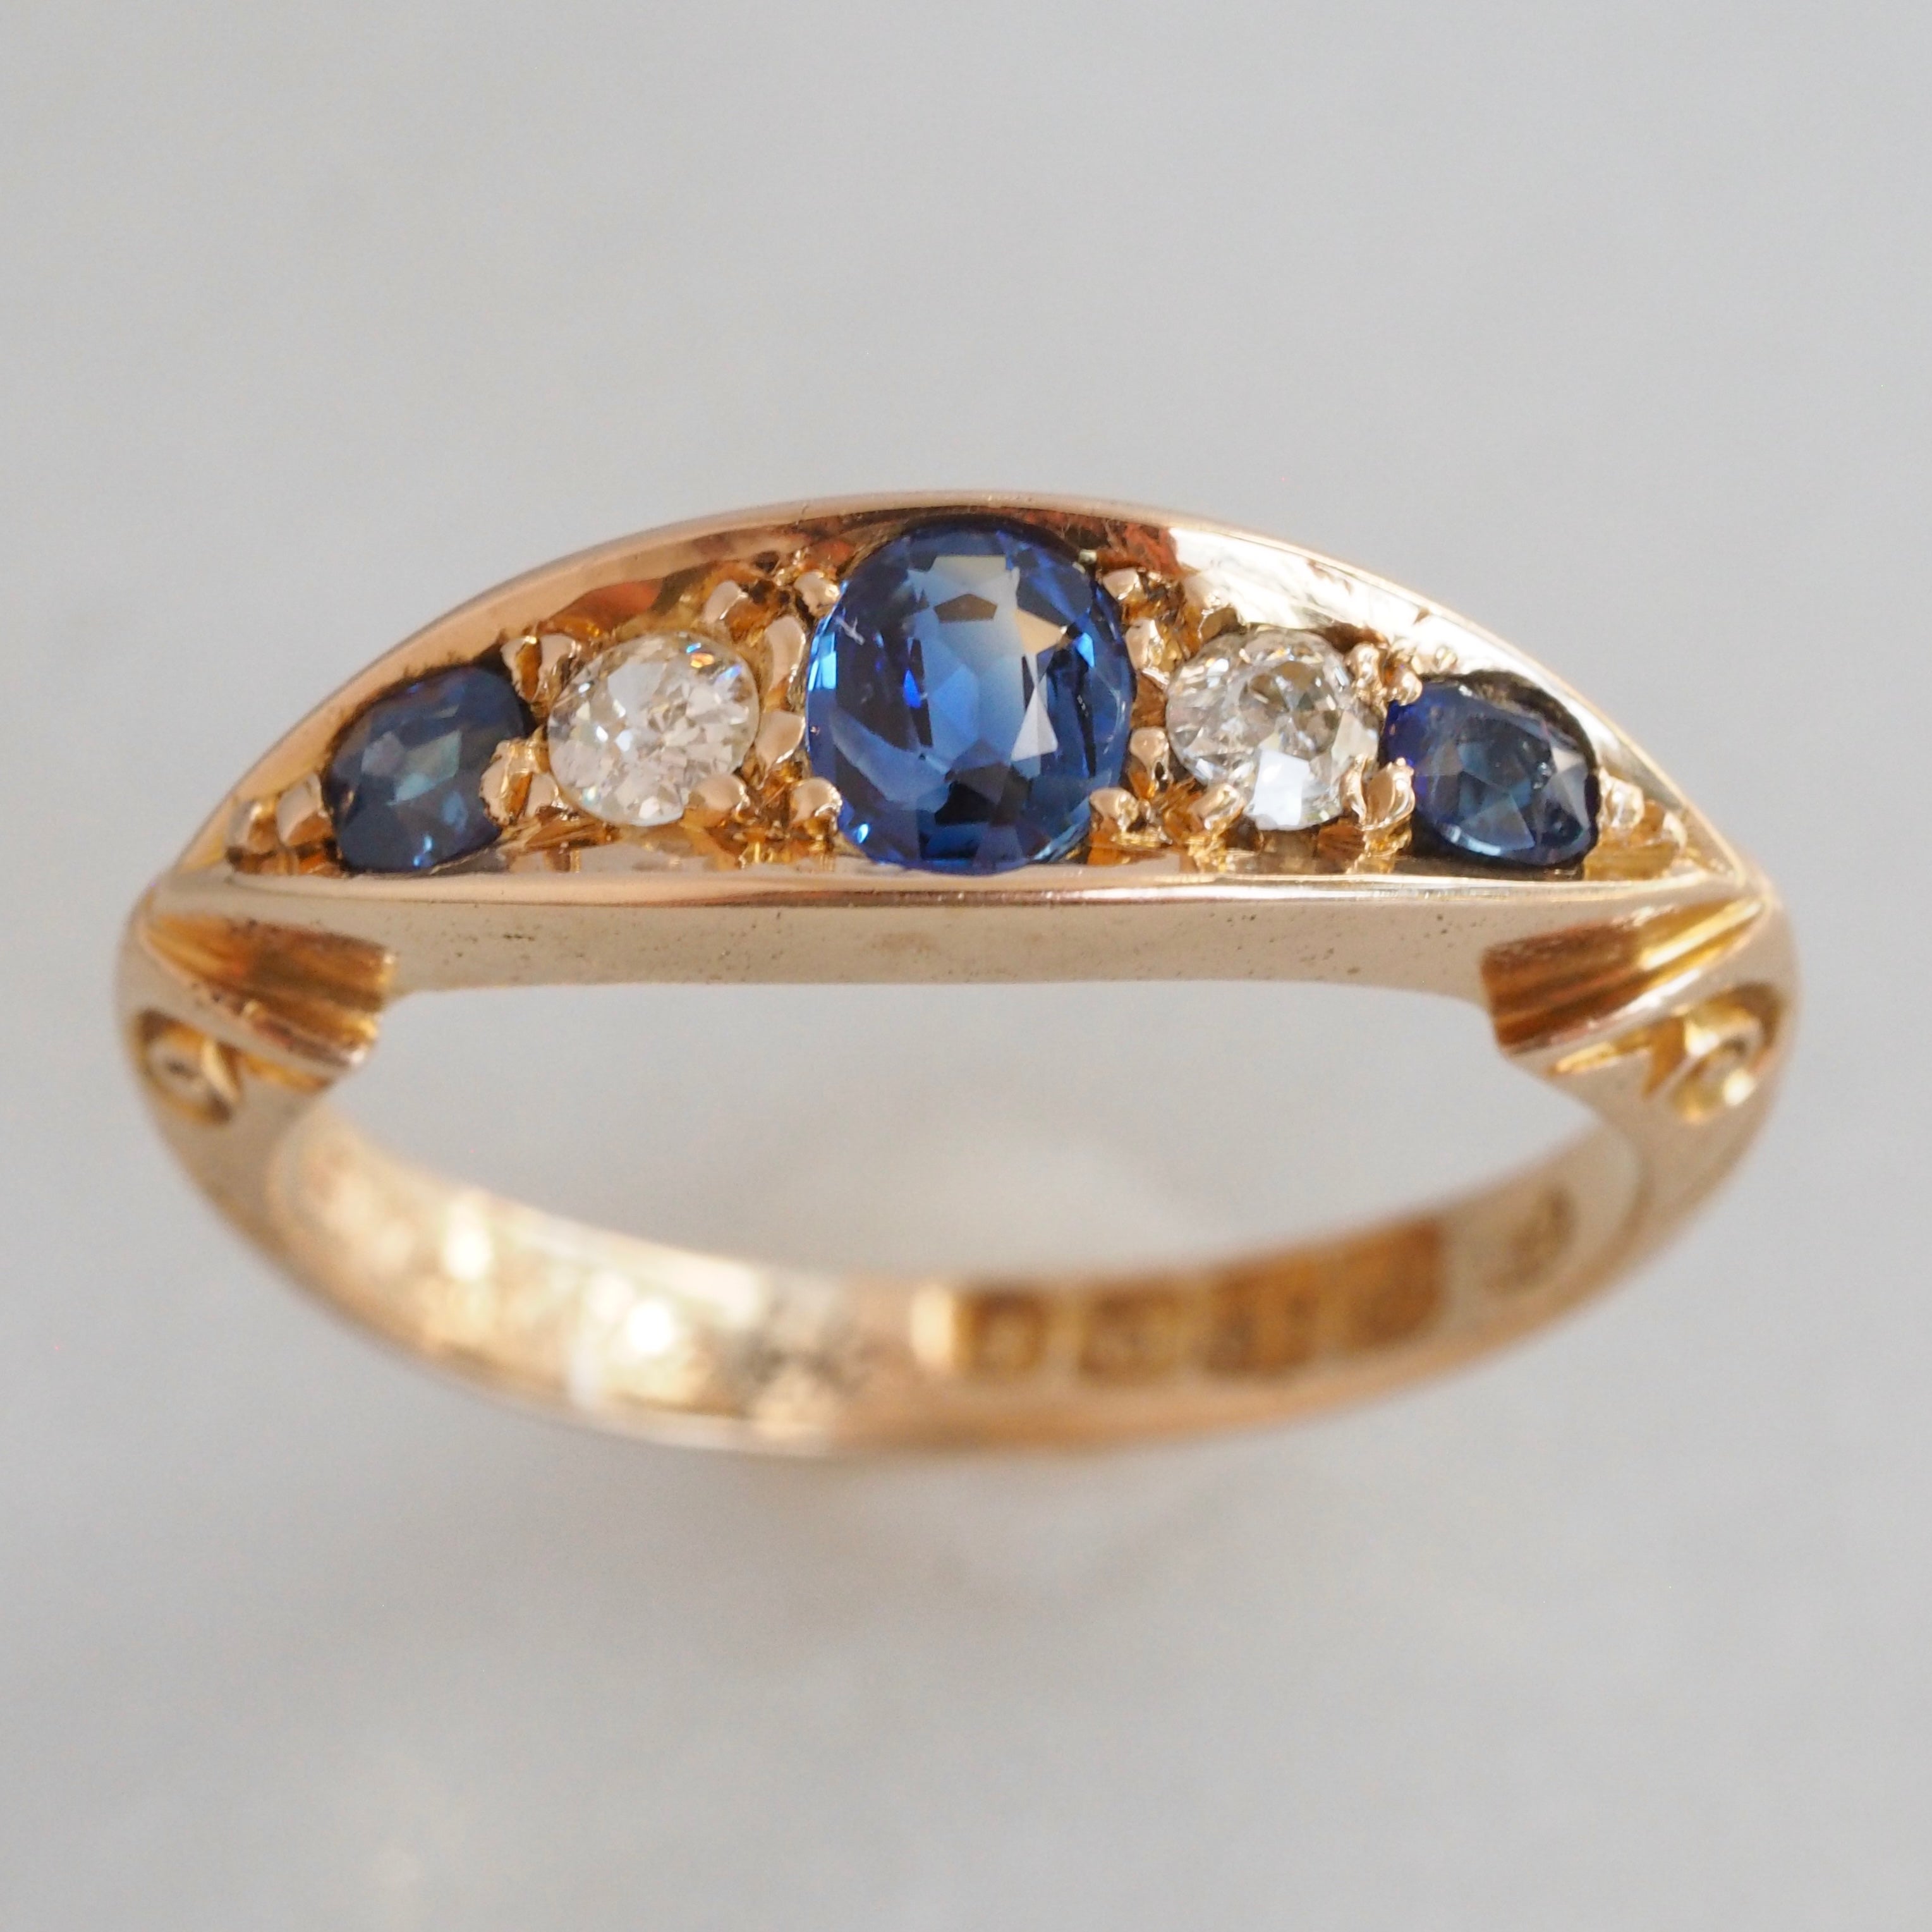 Antique Edwardian 18k Gold Sapphire and Old Mine Cut Diamond Five Stone Boat Ring